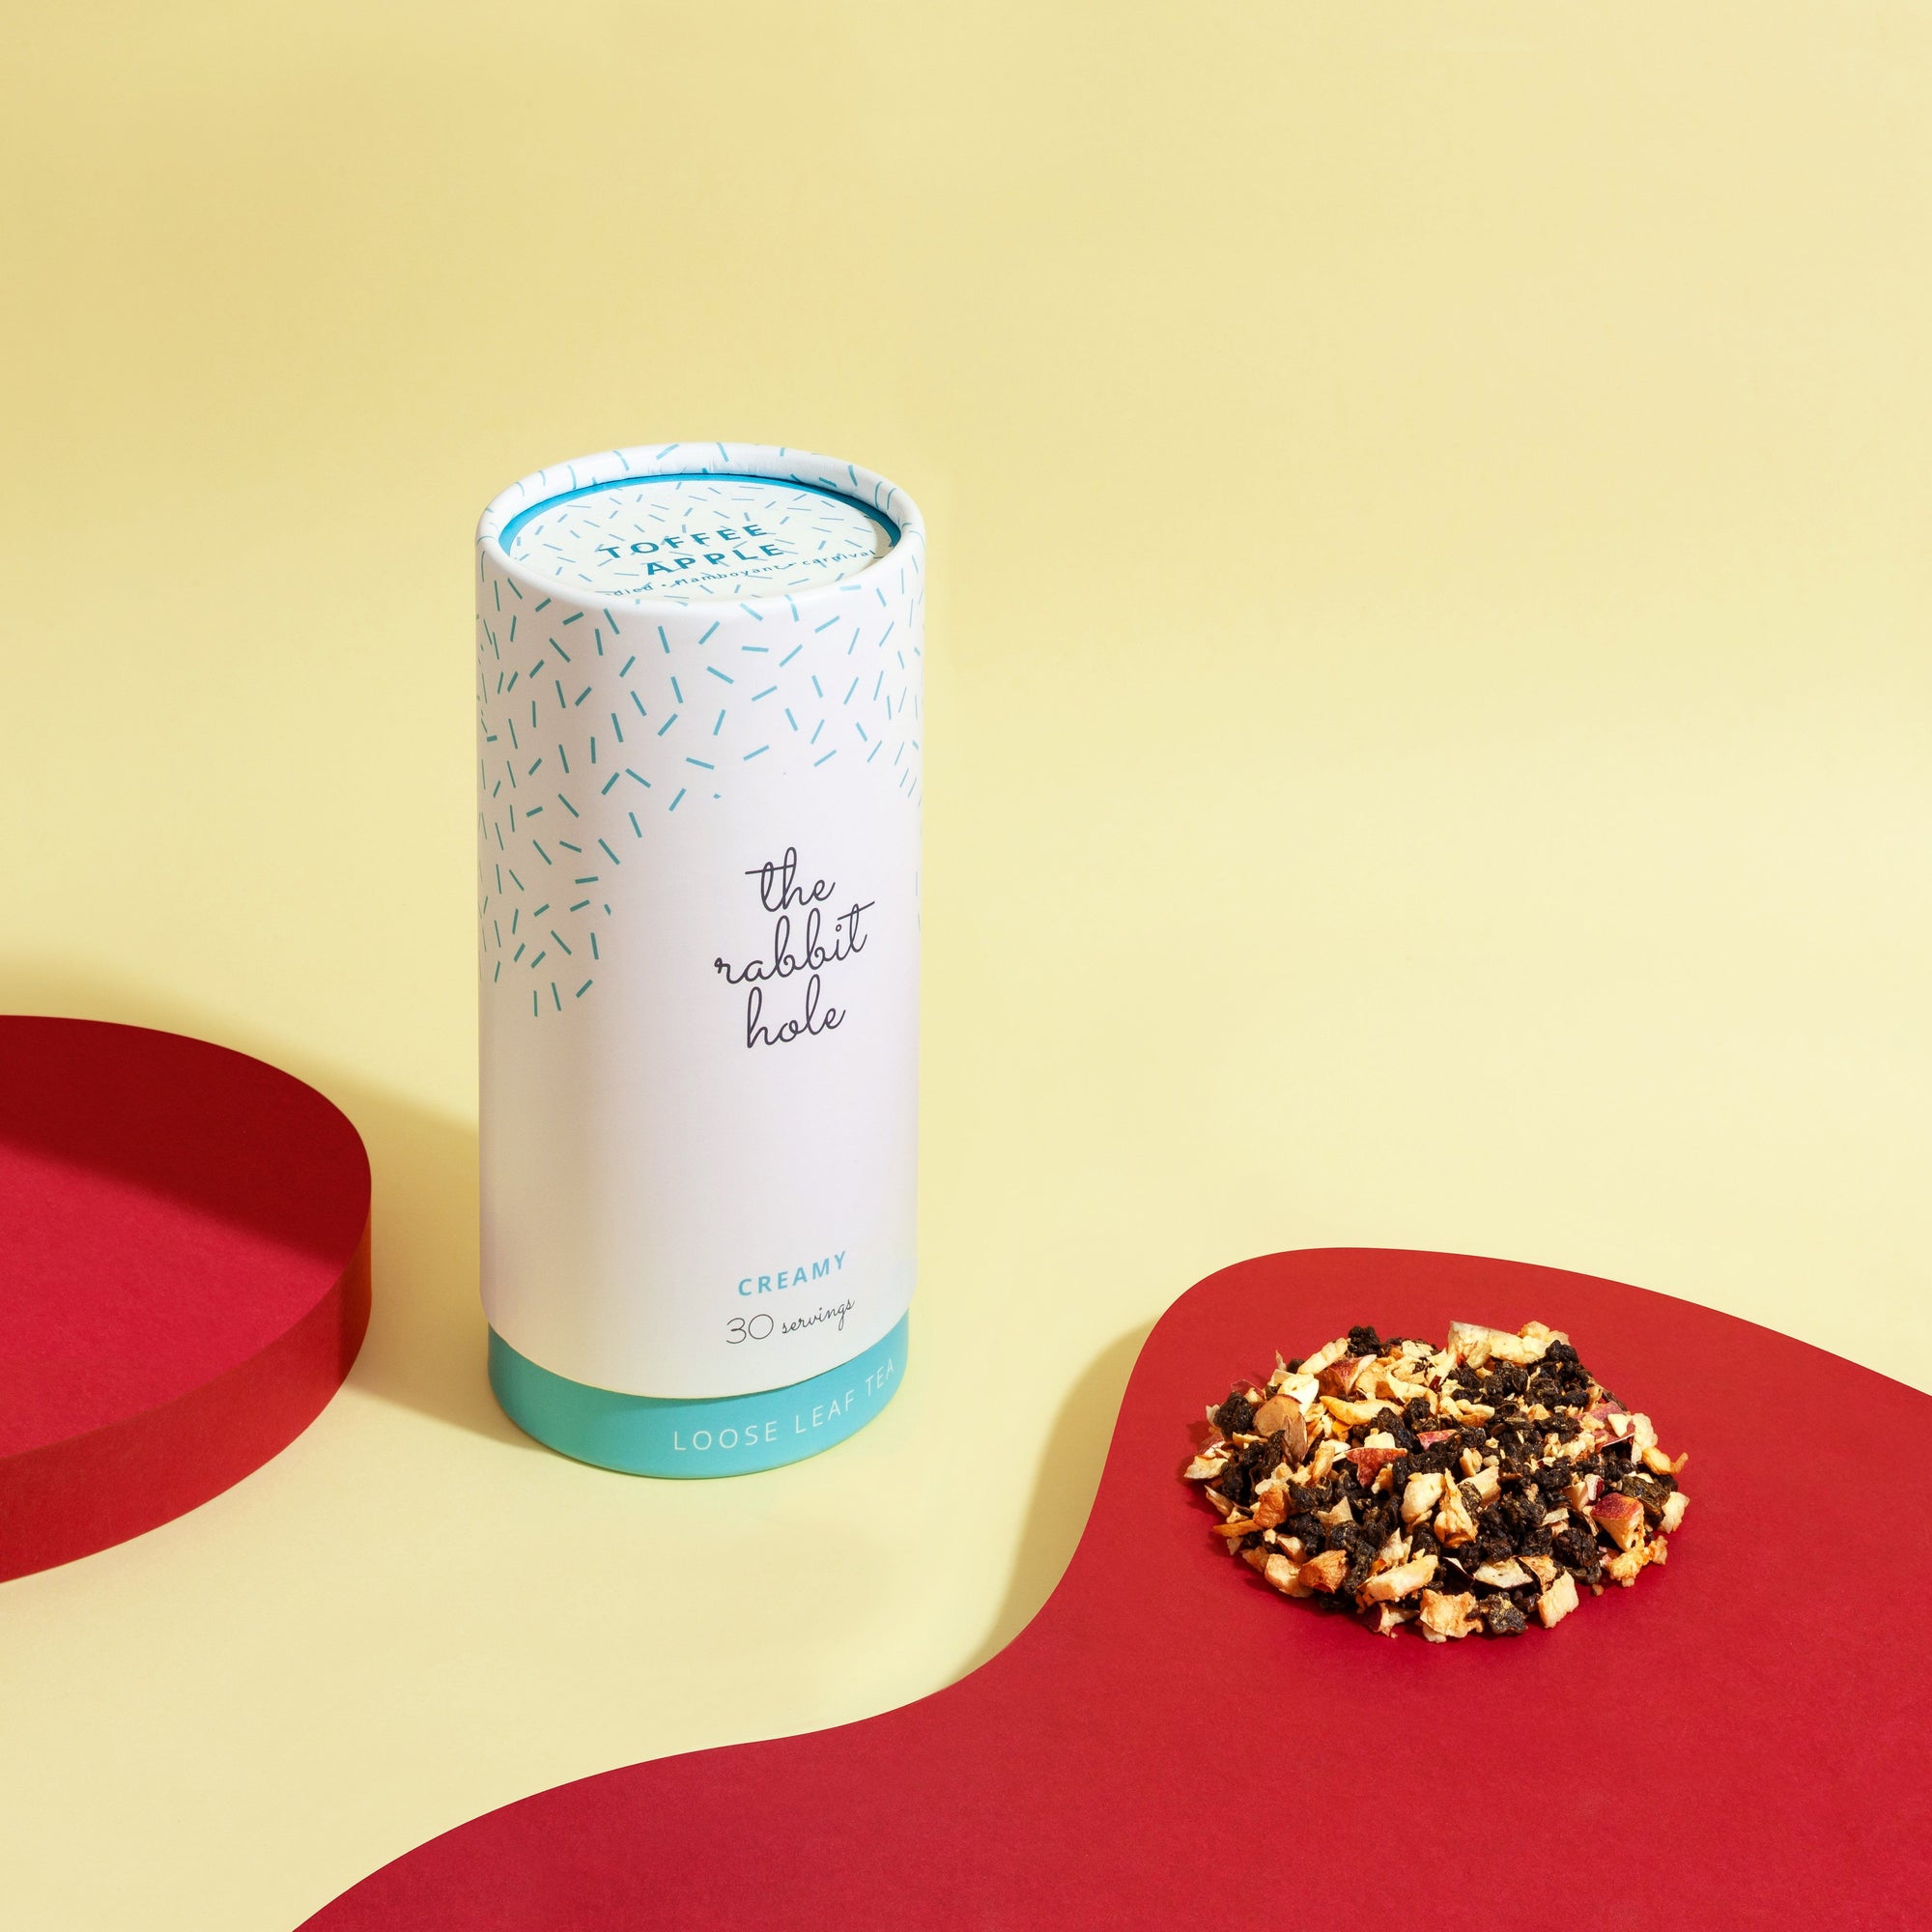 Toffee Apple loose leaf Creamy tea by The Rabbit Hole - Australian Made Tea - canister on a colourful yellow and red background